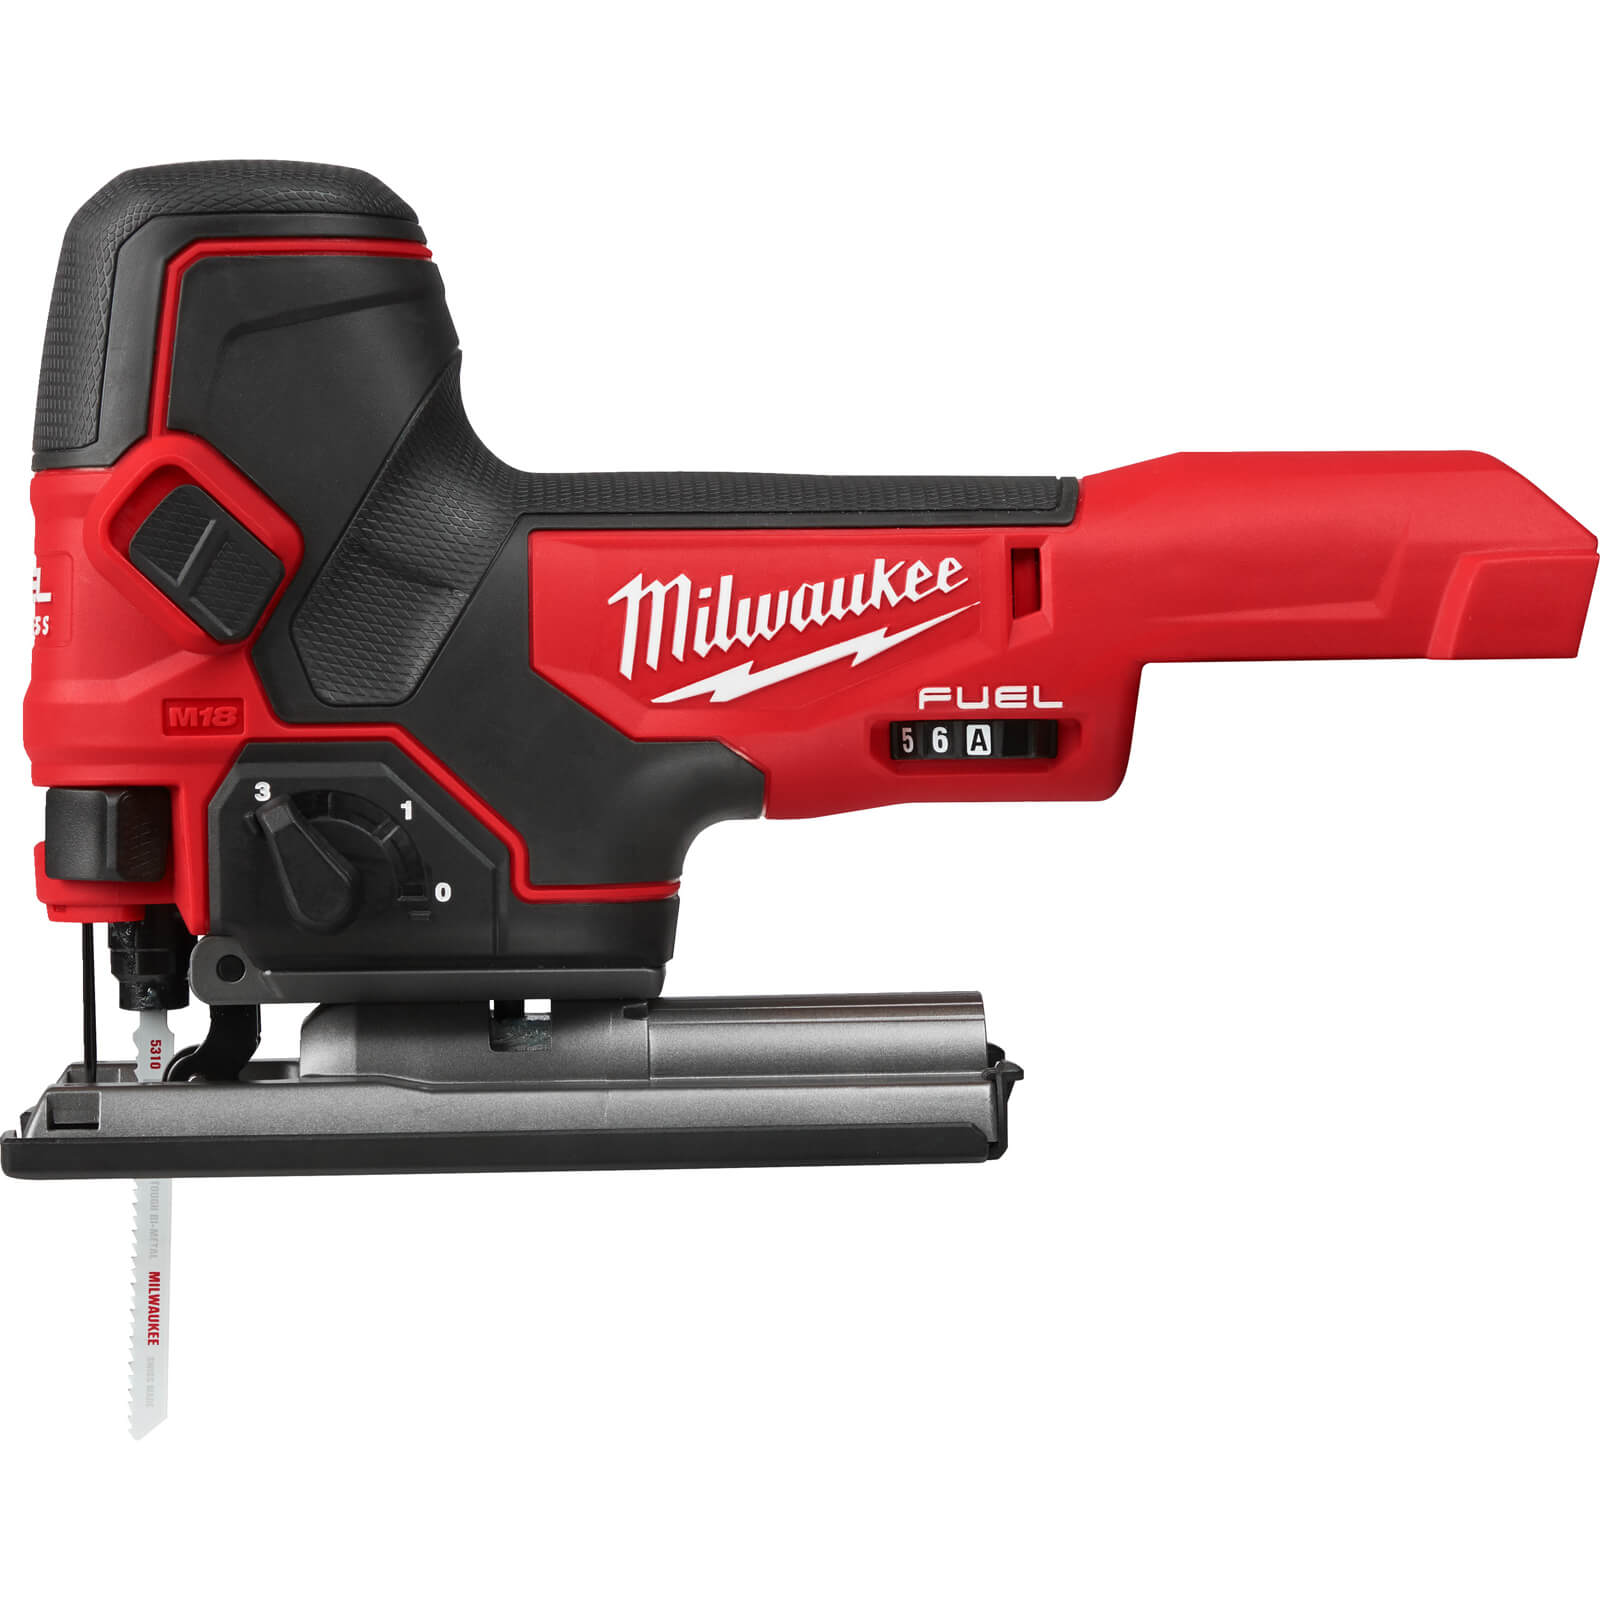 Image of Milwaukee M18 FBJS Fuel 18v Cordless Brushless Body Grip Jigsaw No Batteries No Charger Case